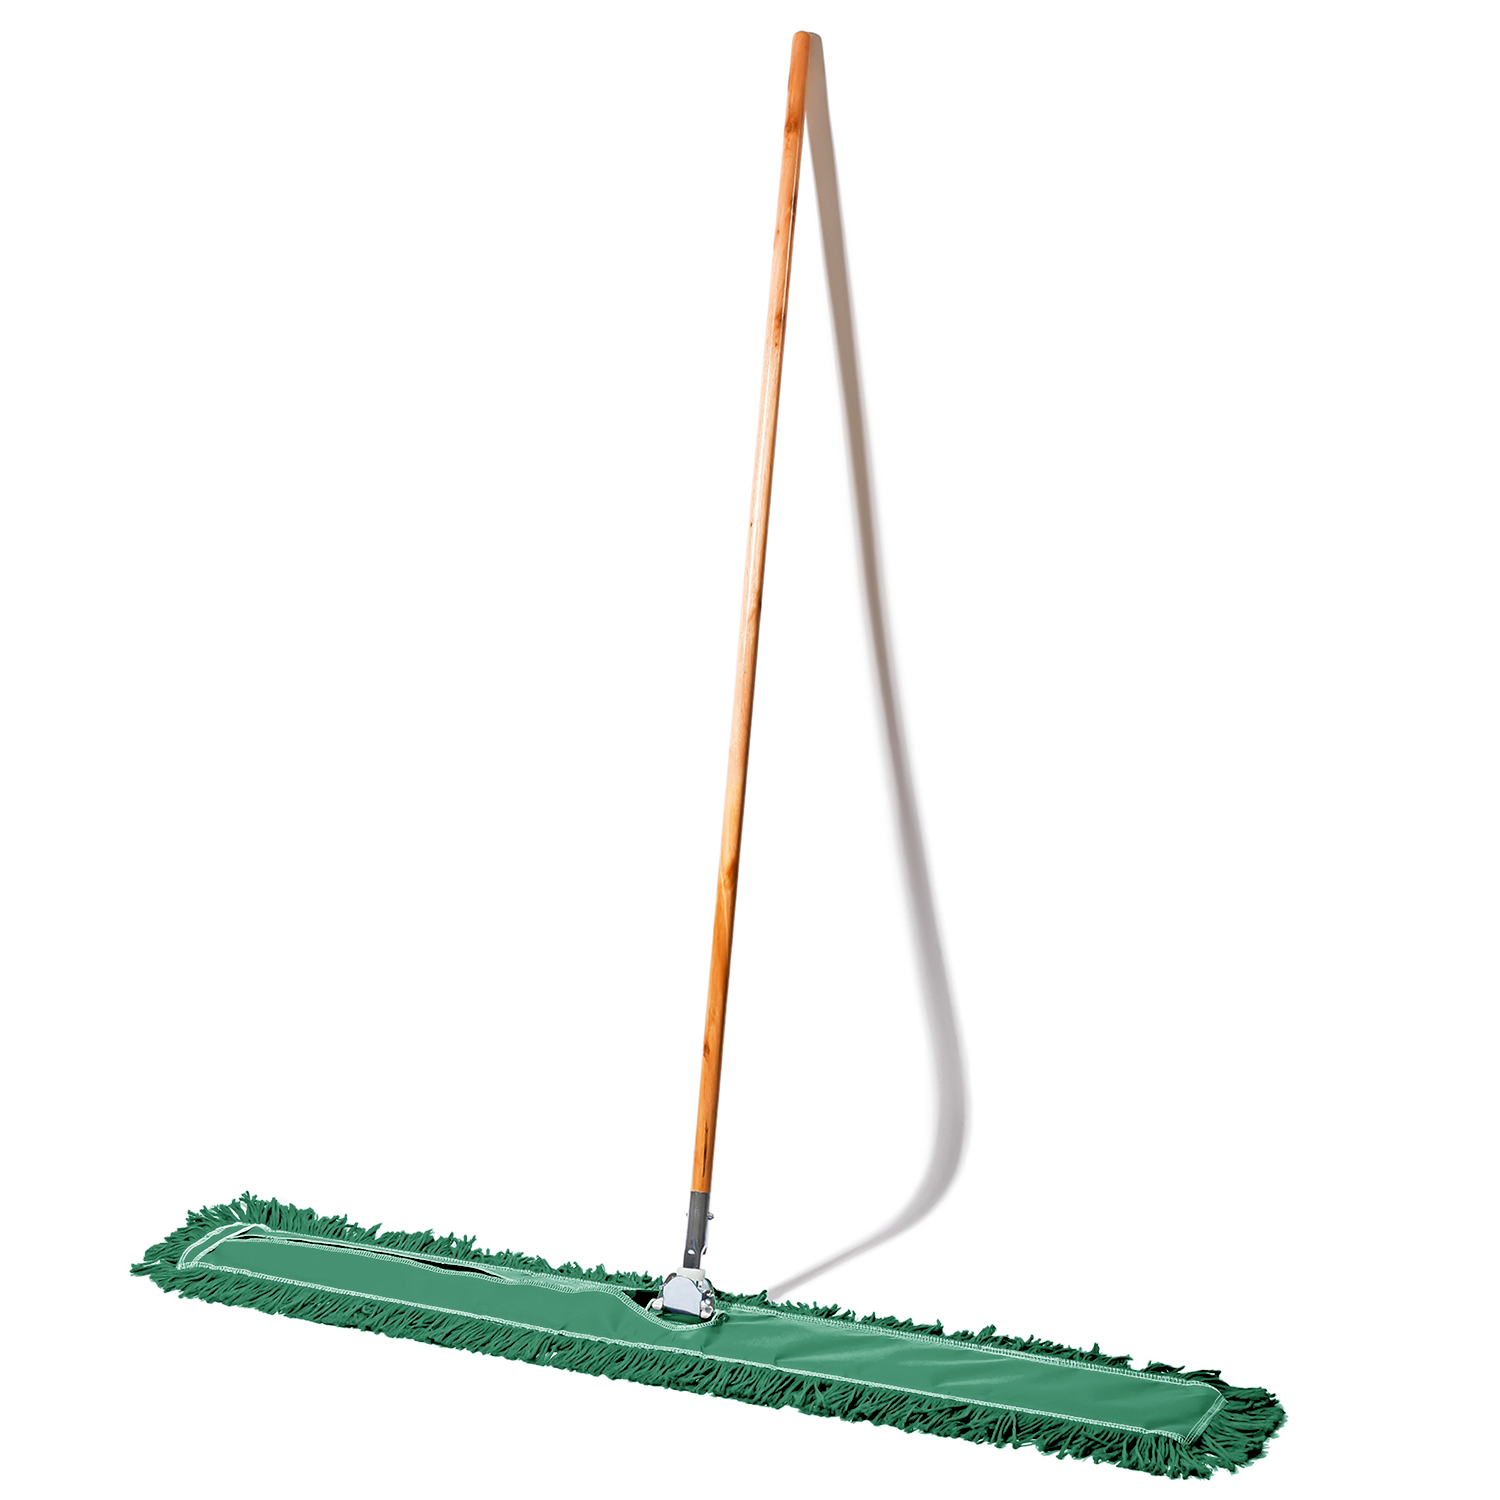 Tidy Tools 48 inch Dust Mop Kit Wood Handle, Green